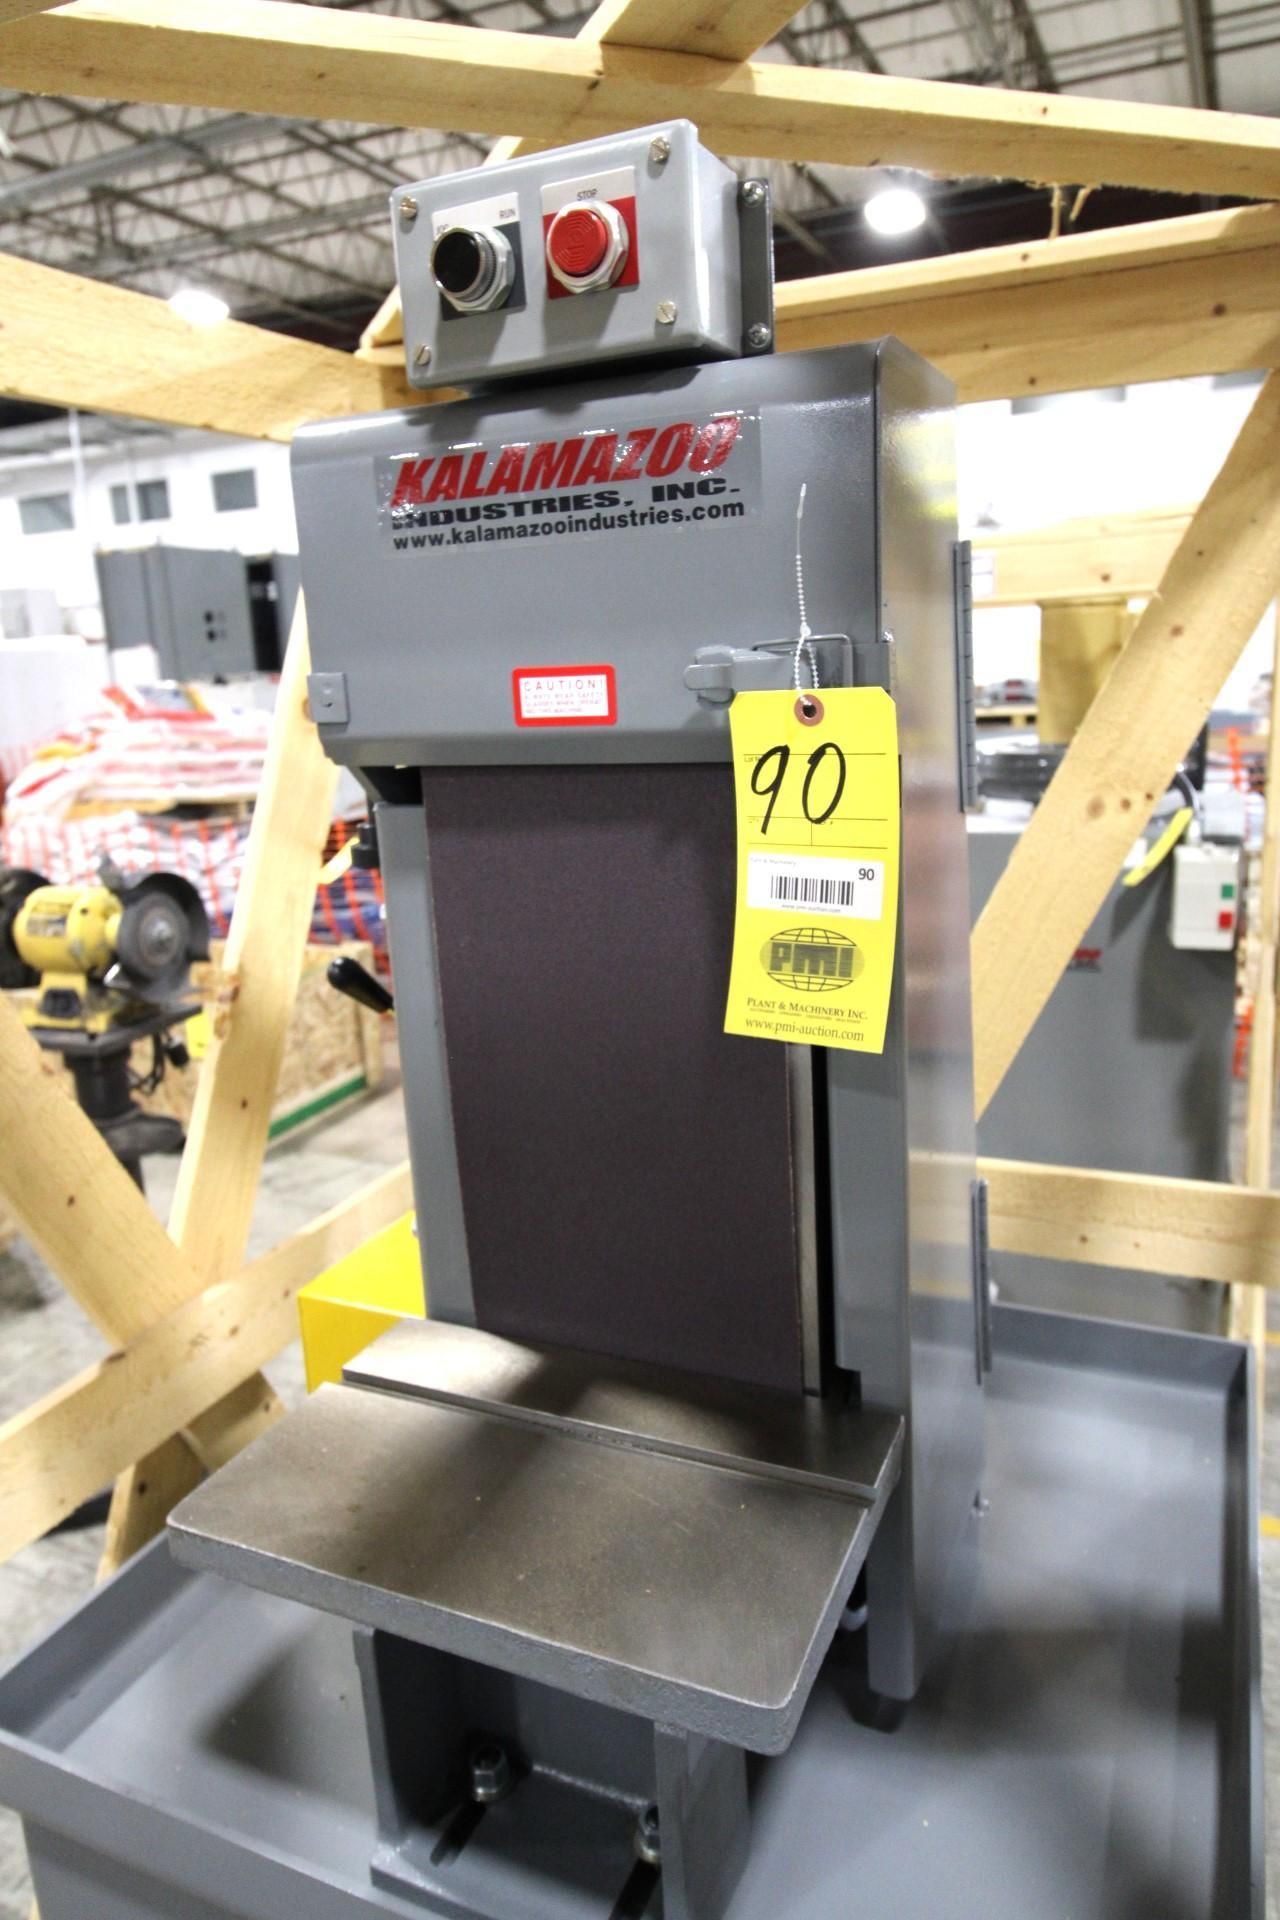 INDUSTRIAL SANDER, W/ DUST COLLECTOR, KALAMAZOO S8D, 8” x 60”, 7.5 HP, w/ dust collection system, - Image 4 of 7